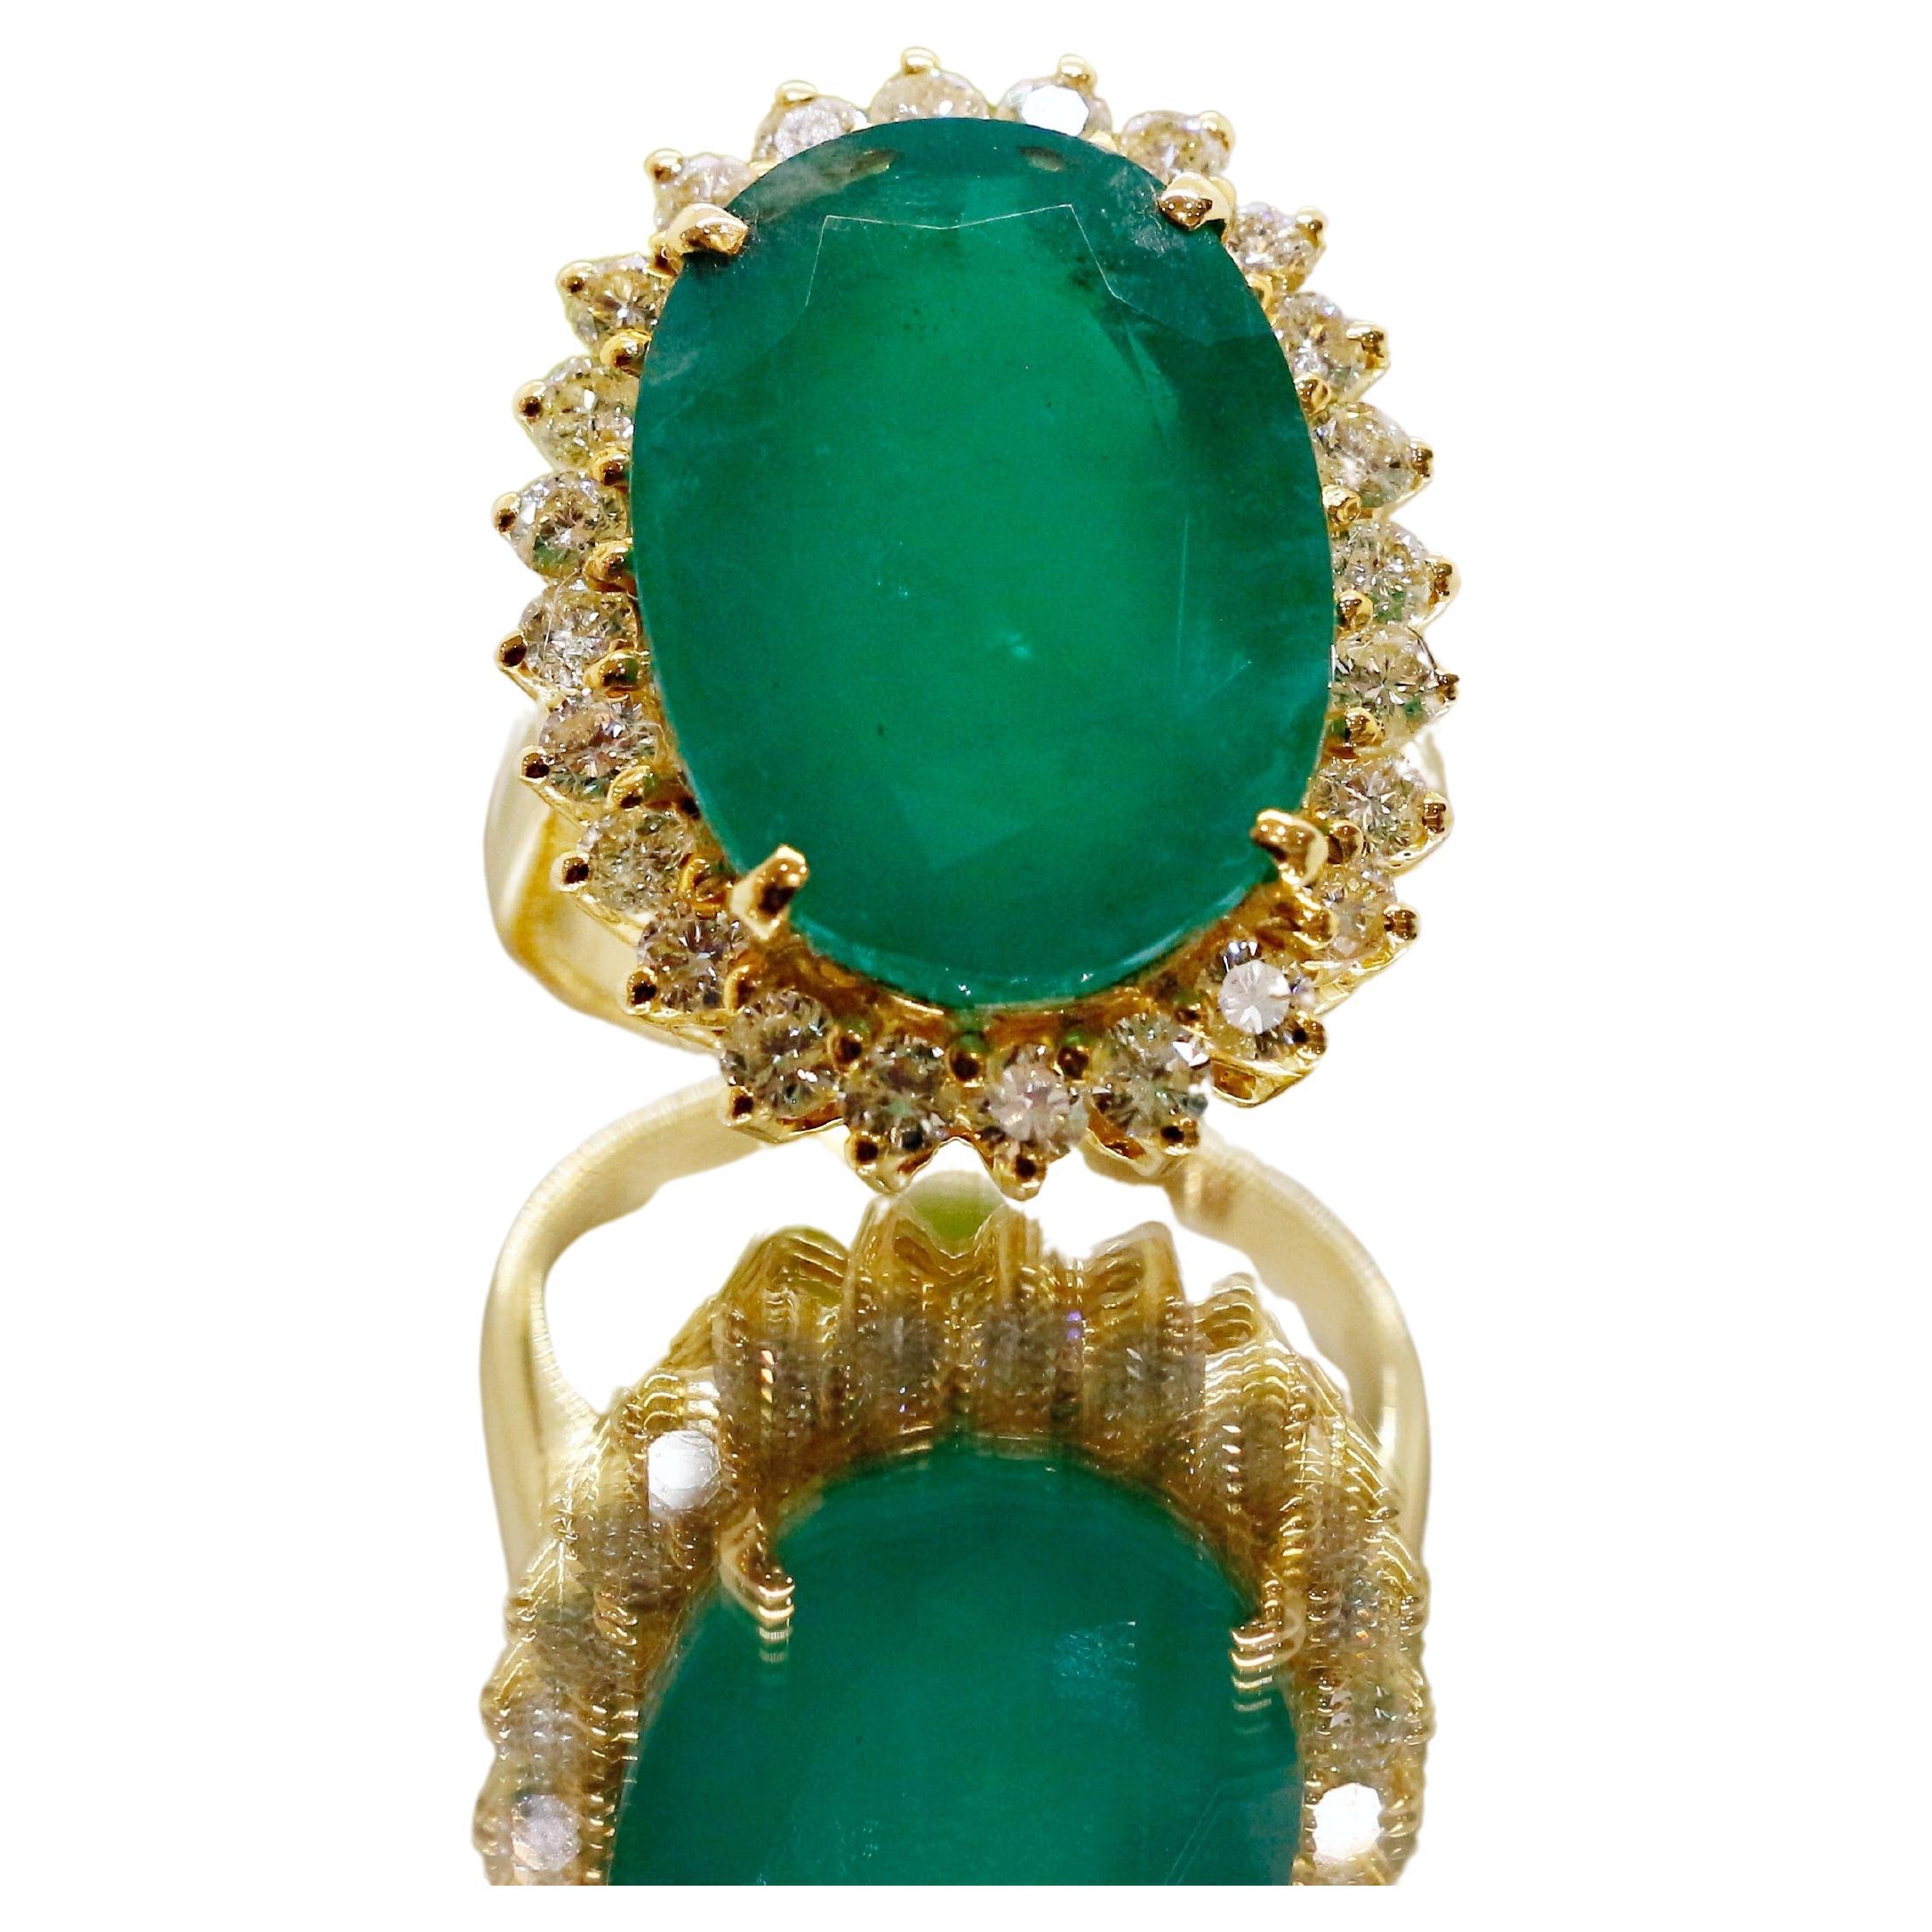 10ct Emerald diamond cocktail Ring in 18k Gold 